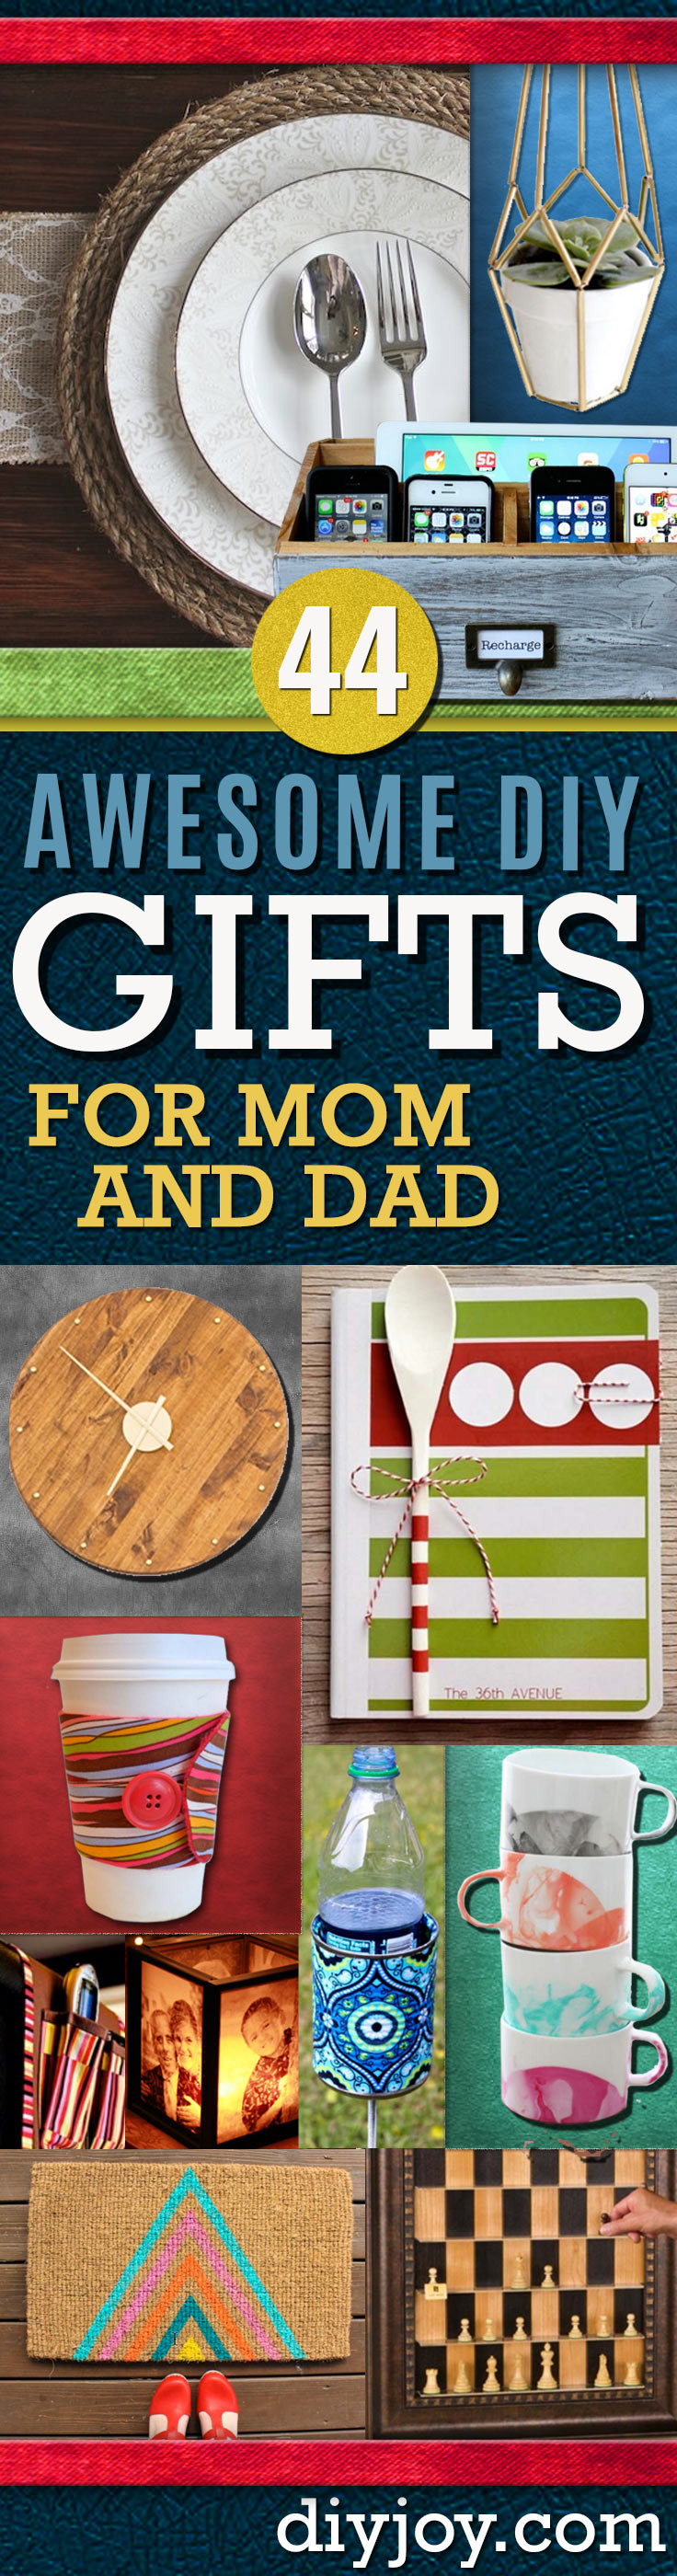 DIY Christmas Present For Mom
 Awesome DIY Gift Ideas Mom and Dad Will Love